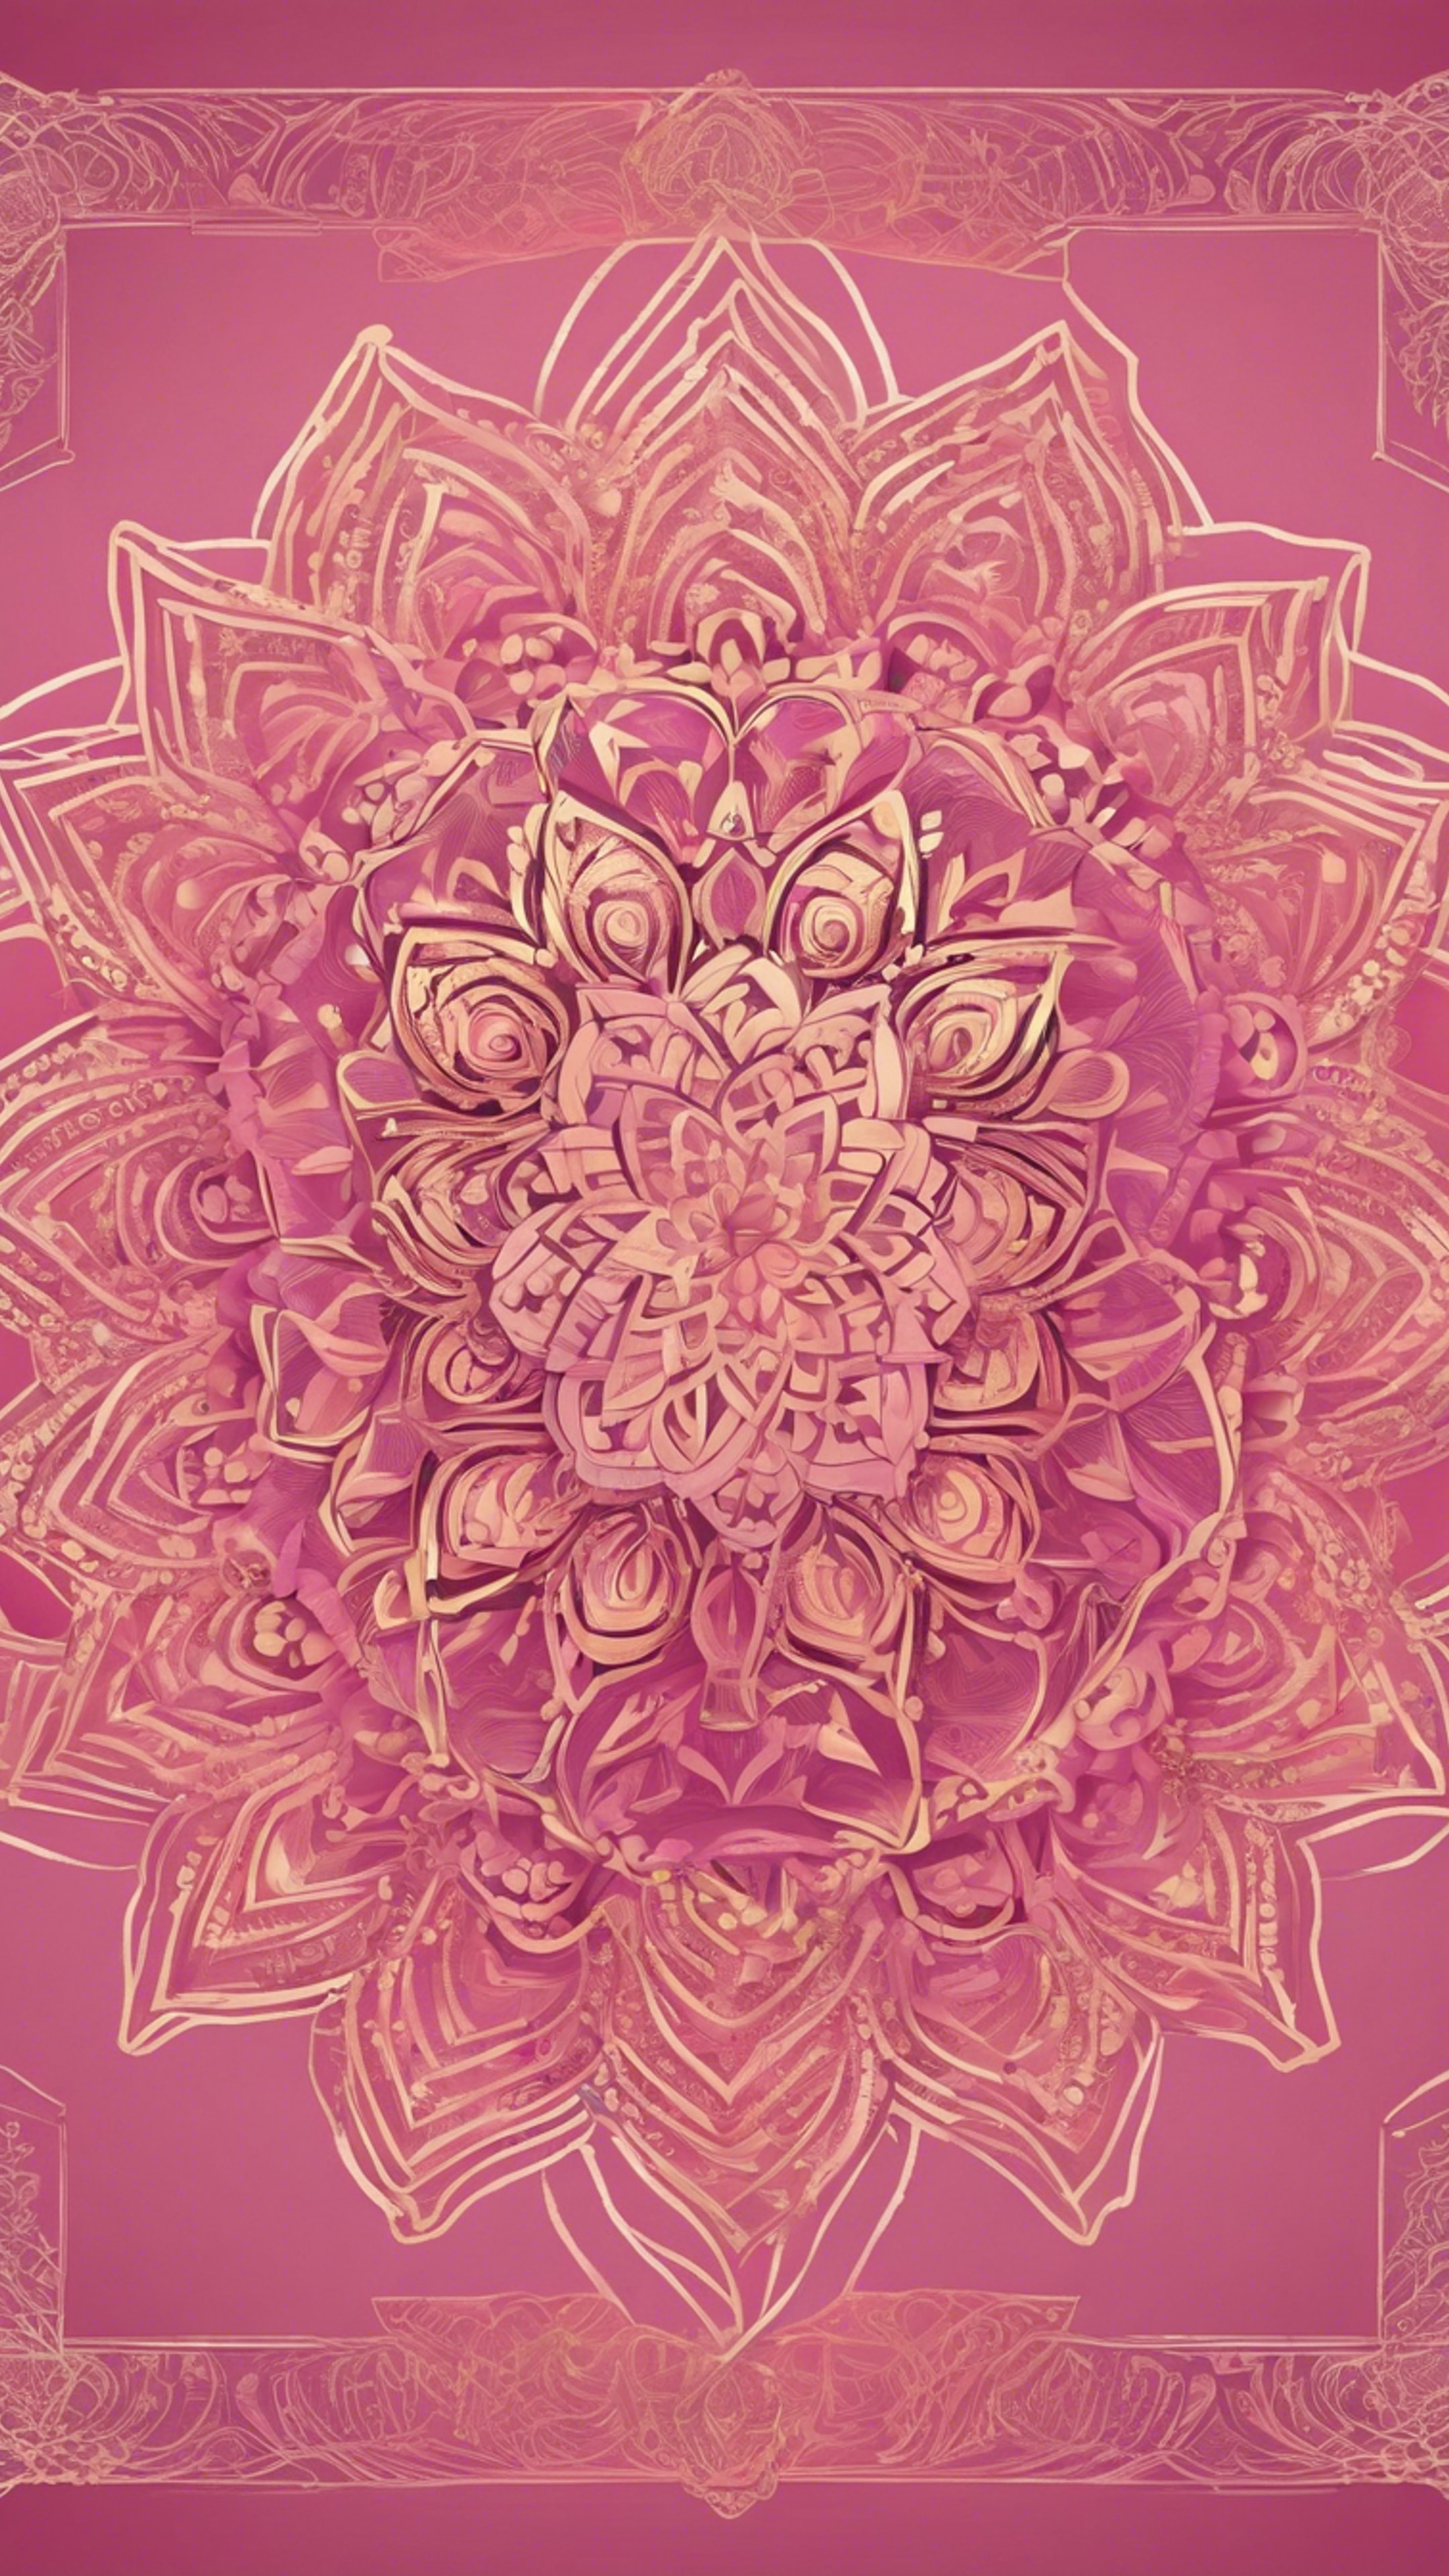 A pink and gold mandala design flourishing with intricate line art and vibrant colors.壁紙[7f3fcd6ed997428c89d3]